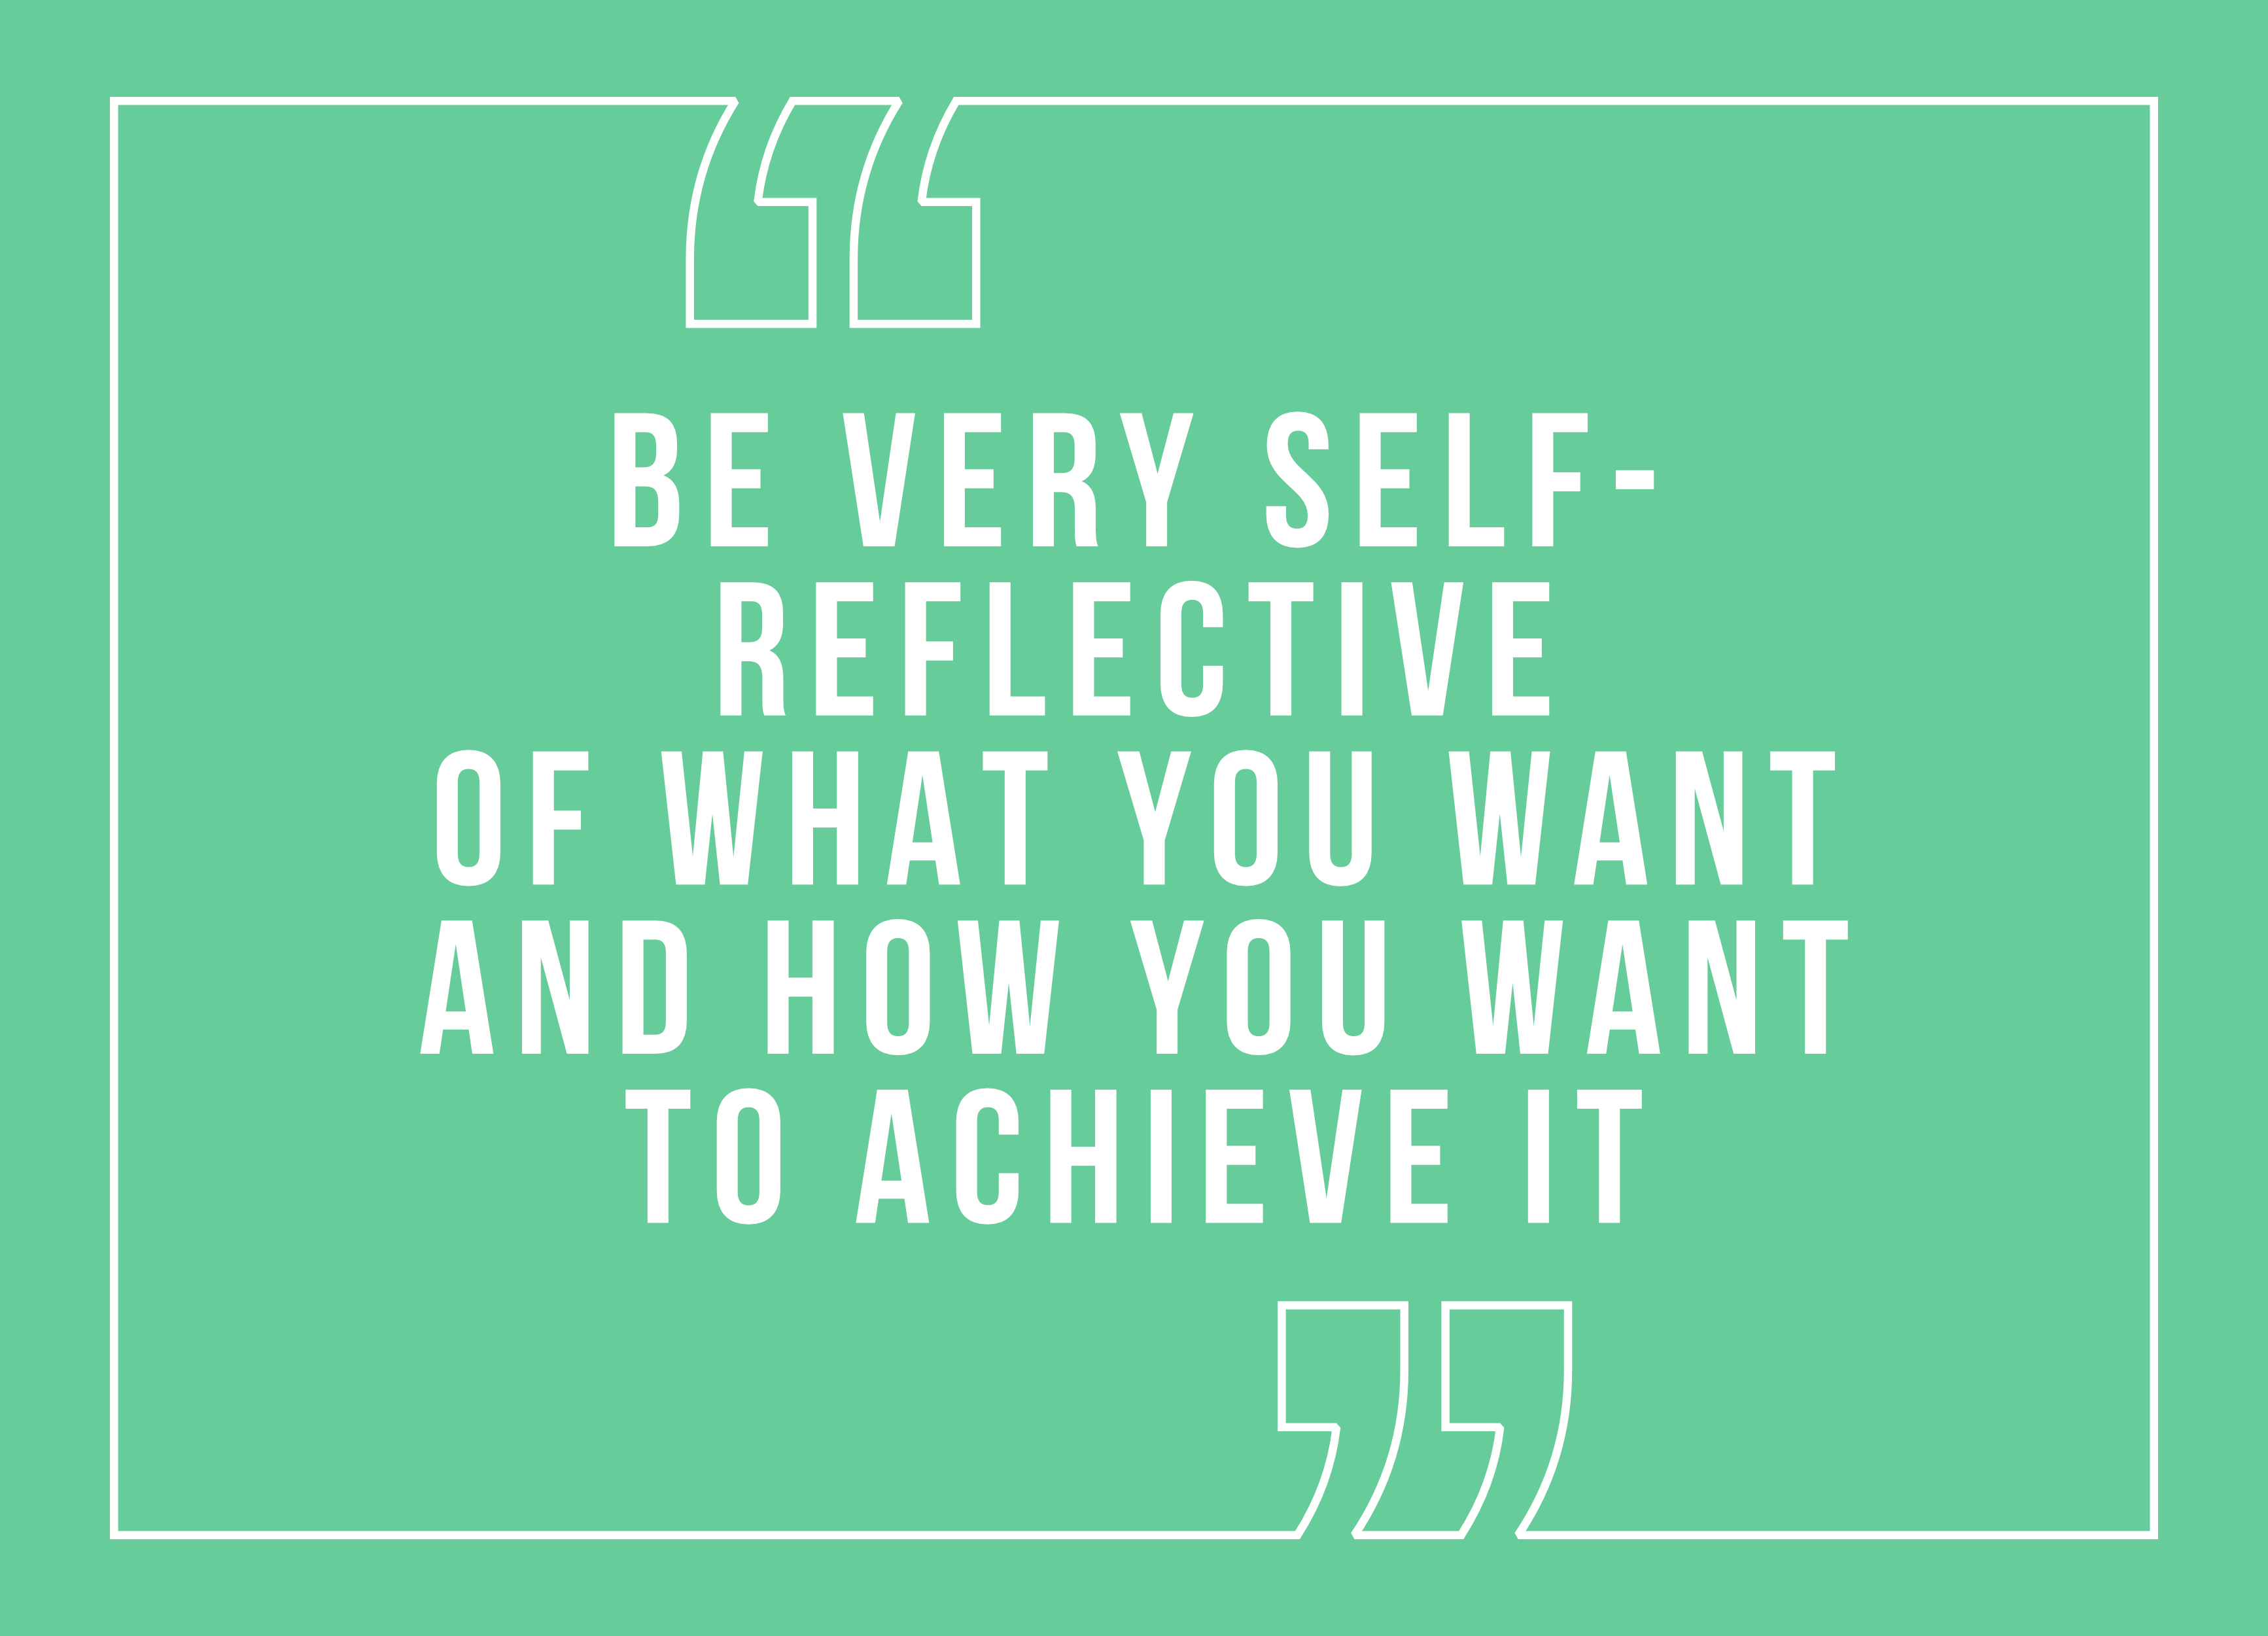 Be very self-reflective